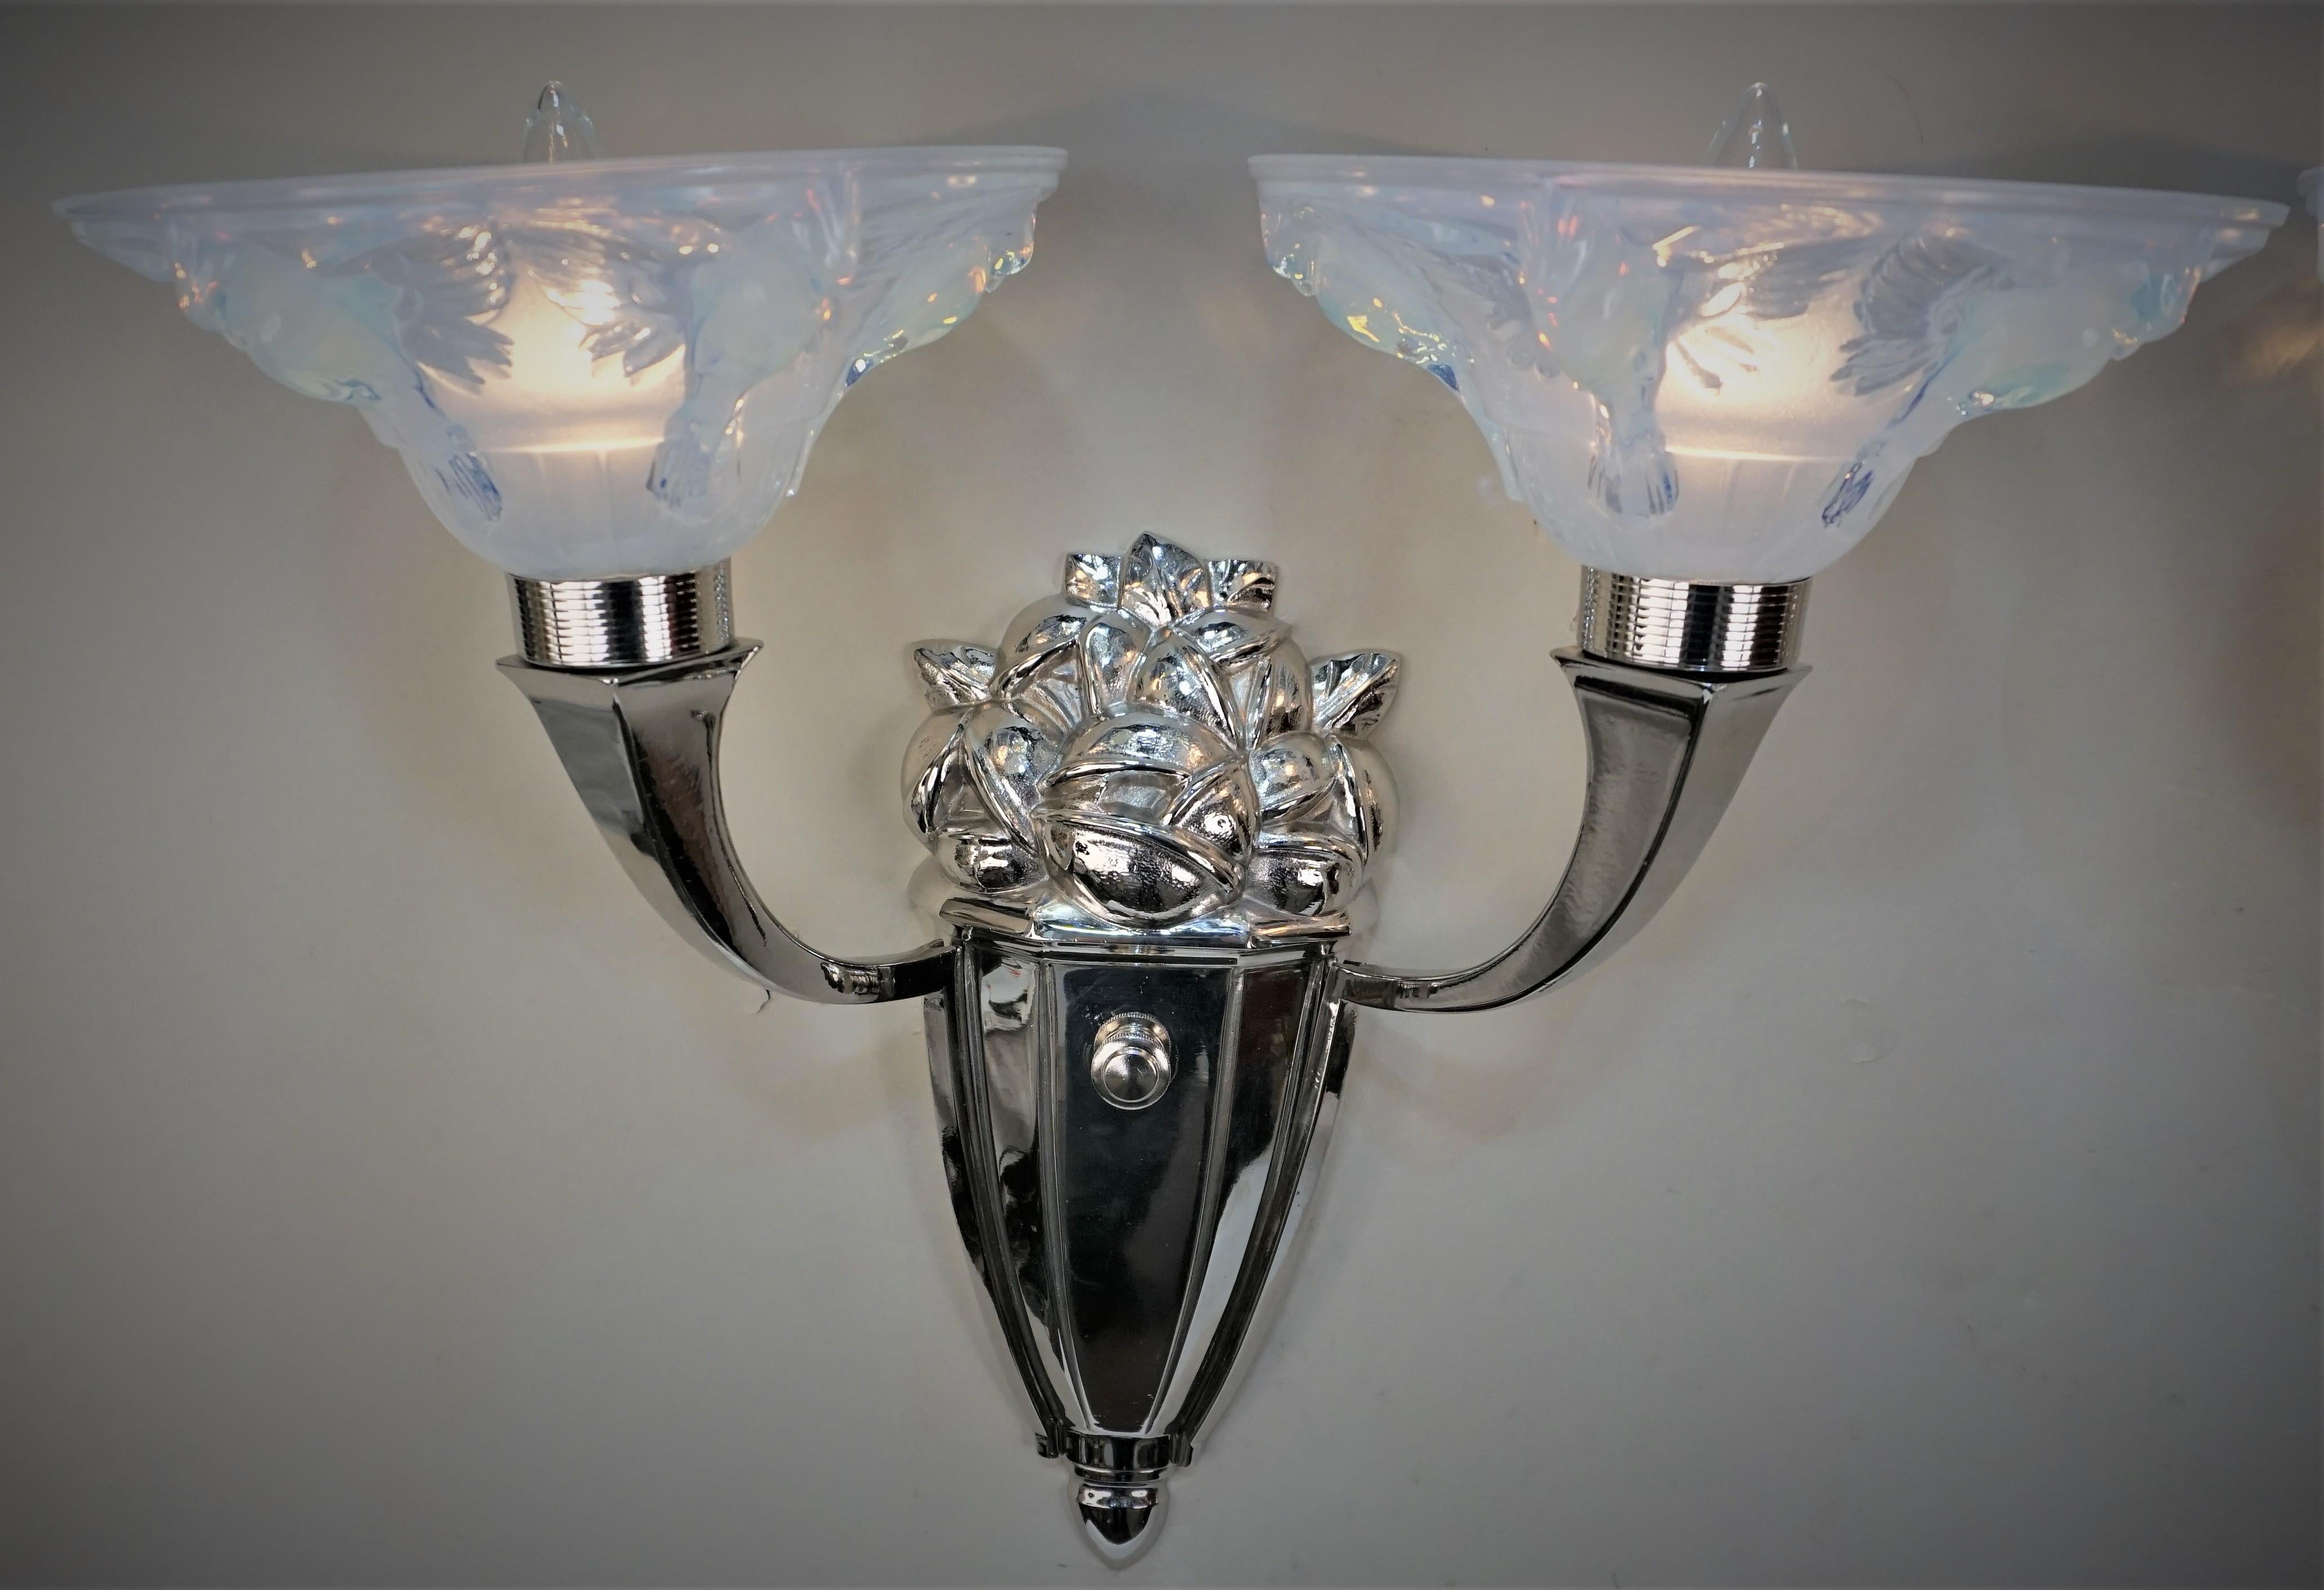 Pair of double arm nickel on bronze wall sconces with honey blue opaline glass shades, flying bird.
Professionally rewired and ready for installation.
60 watts max each light.